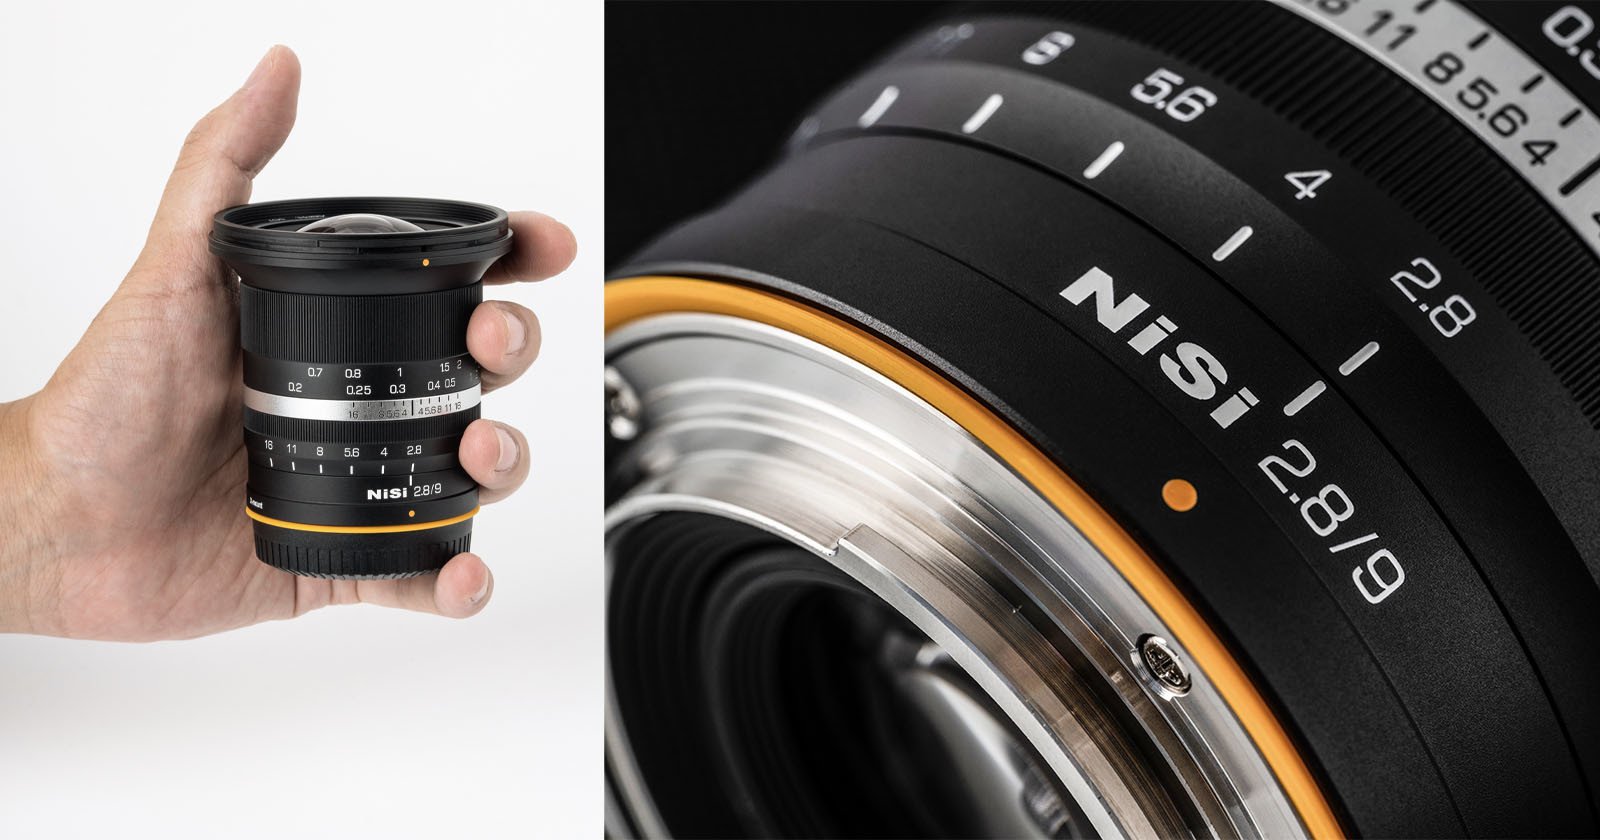 NiSi’s Second-Ever Lens is a $450 9mm f/2.8 for APS-C Cameras